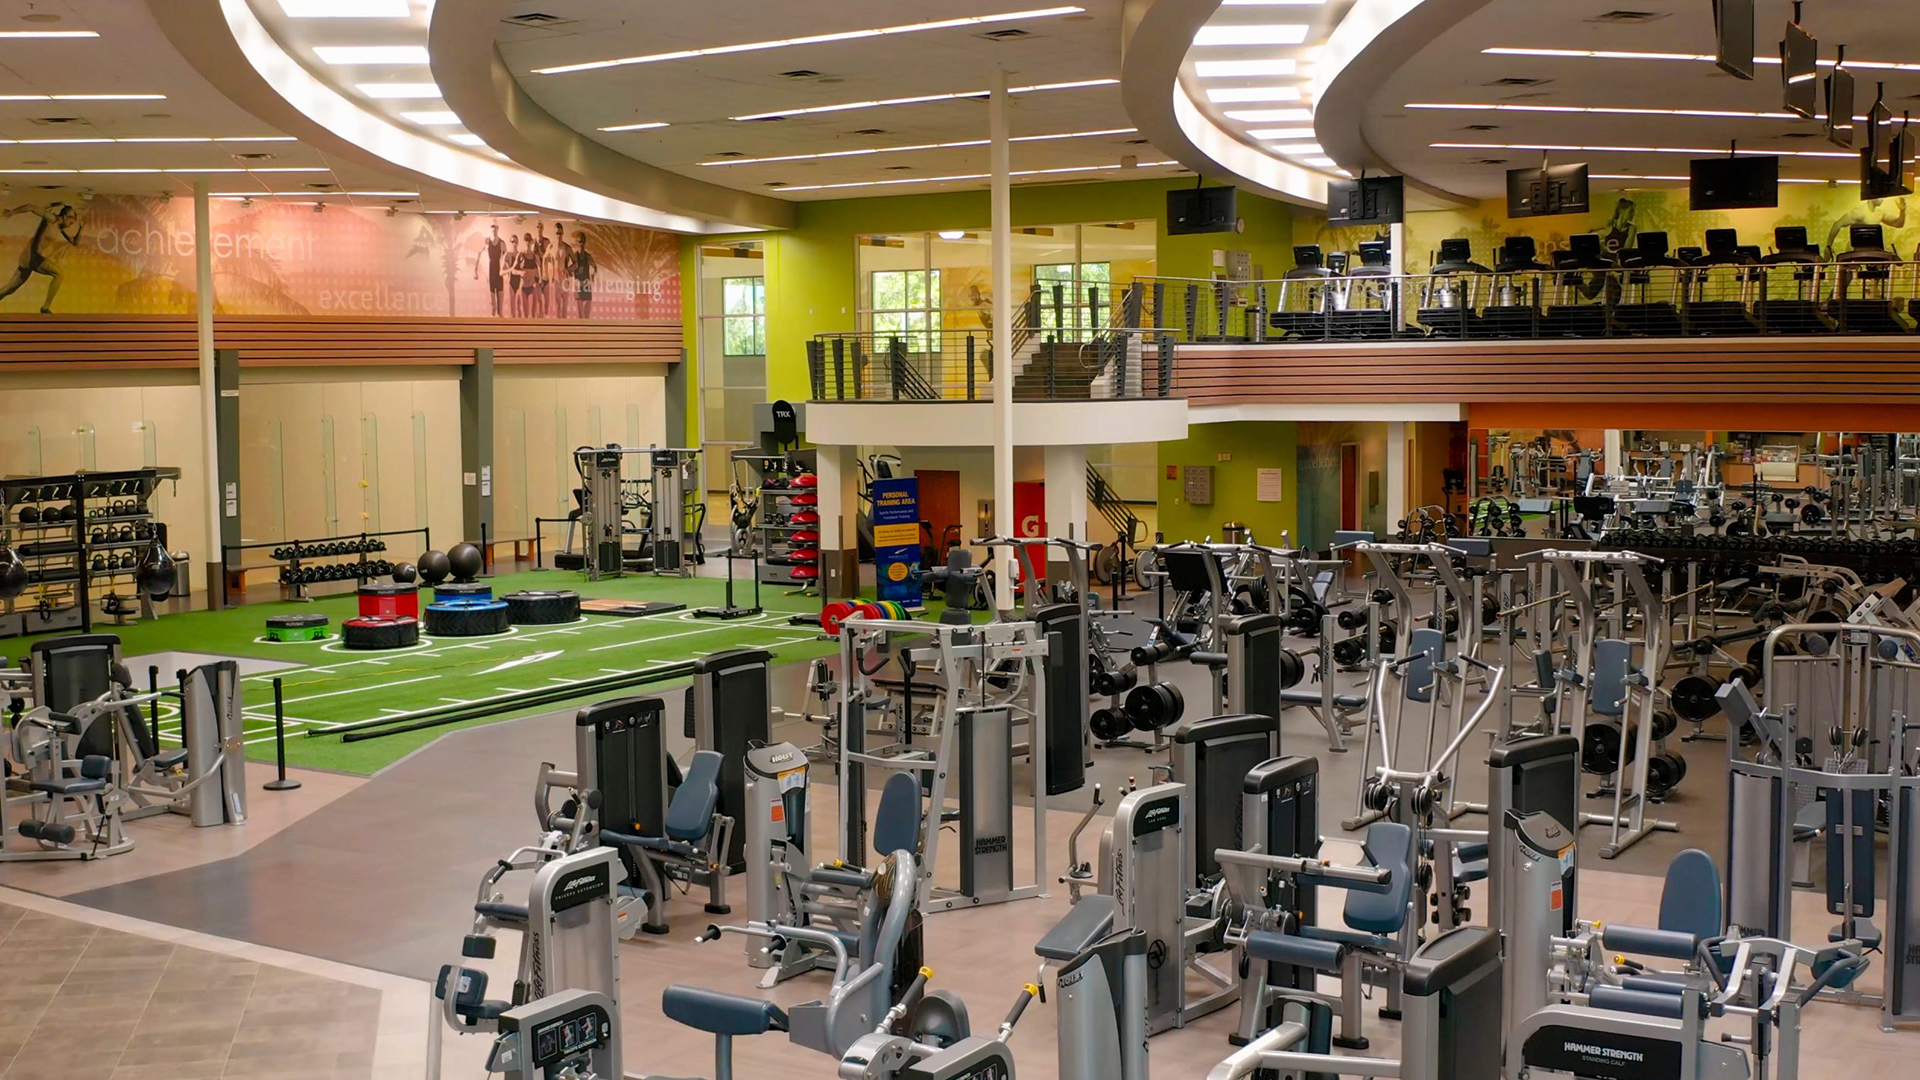  Gym and Fitness Club